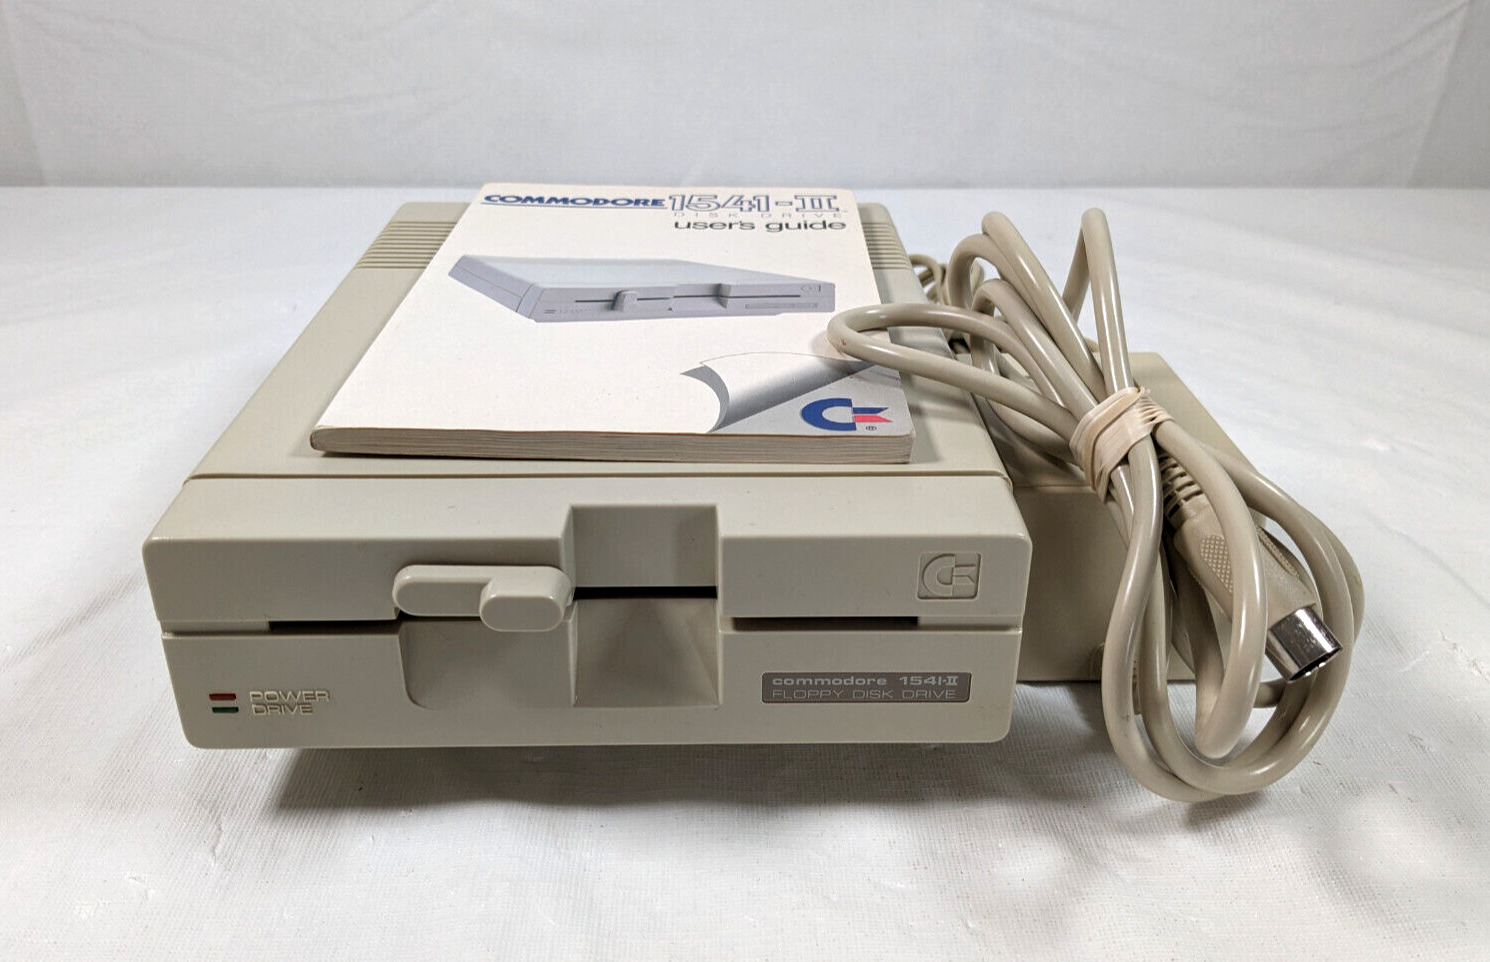 Commodore 1541-II Floppy Drive 5.25 Single Disk C64 with Power Supply (Untested)